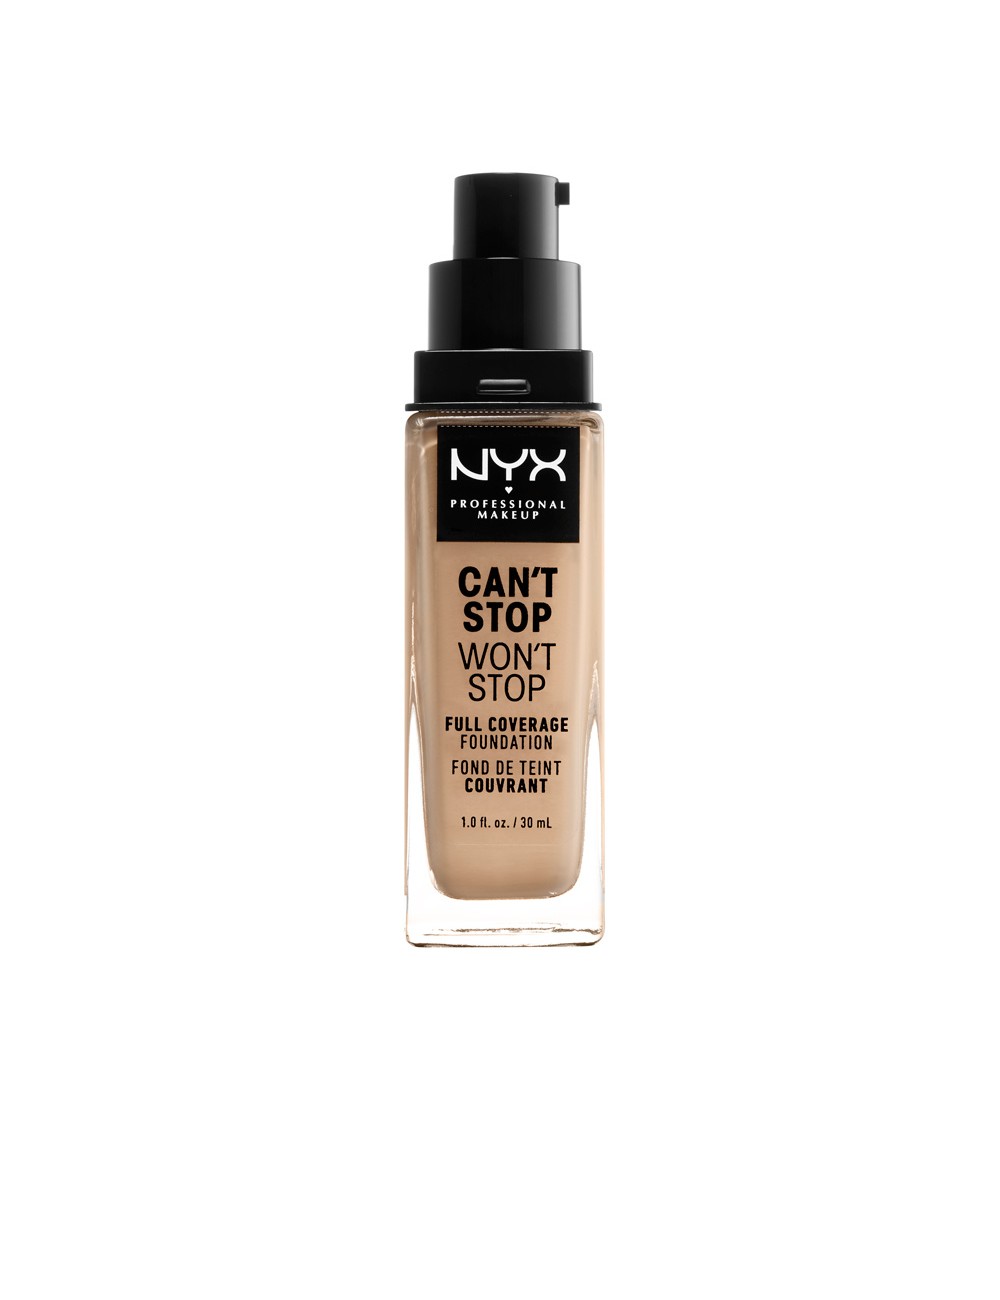 CAN'T STOP WON'T STOP full coverage foundation